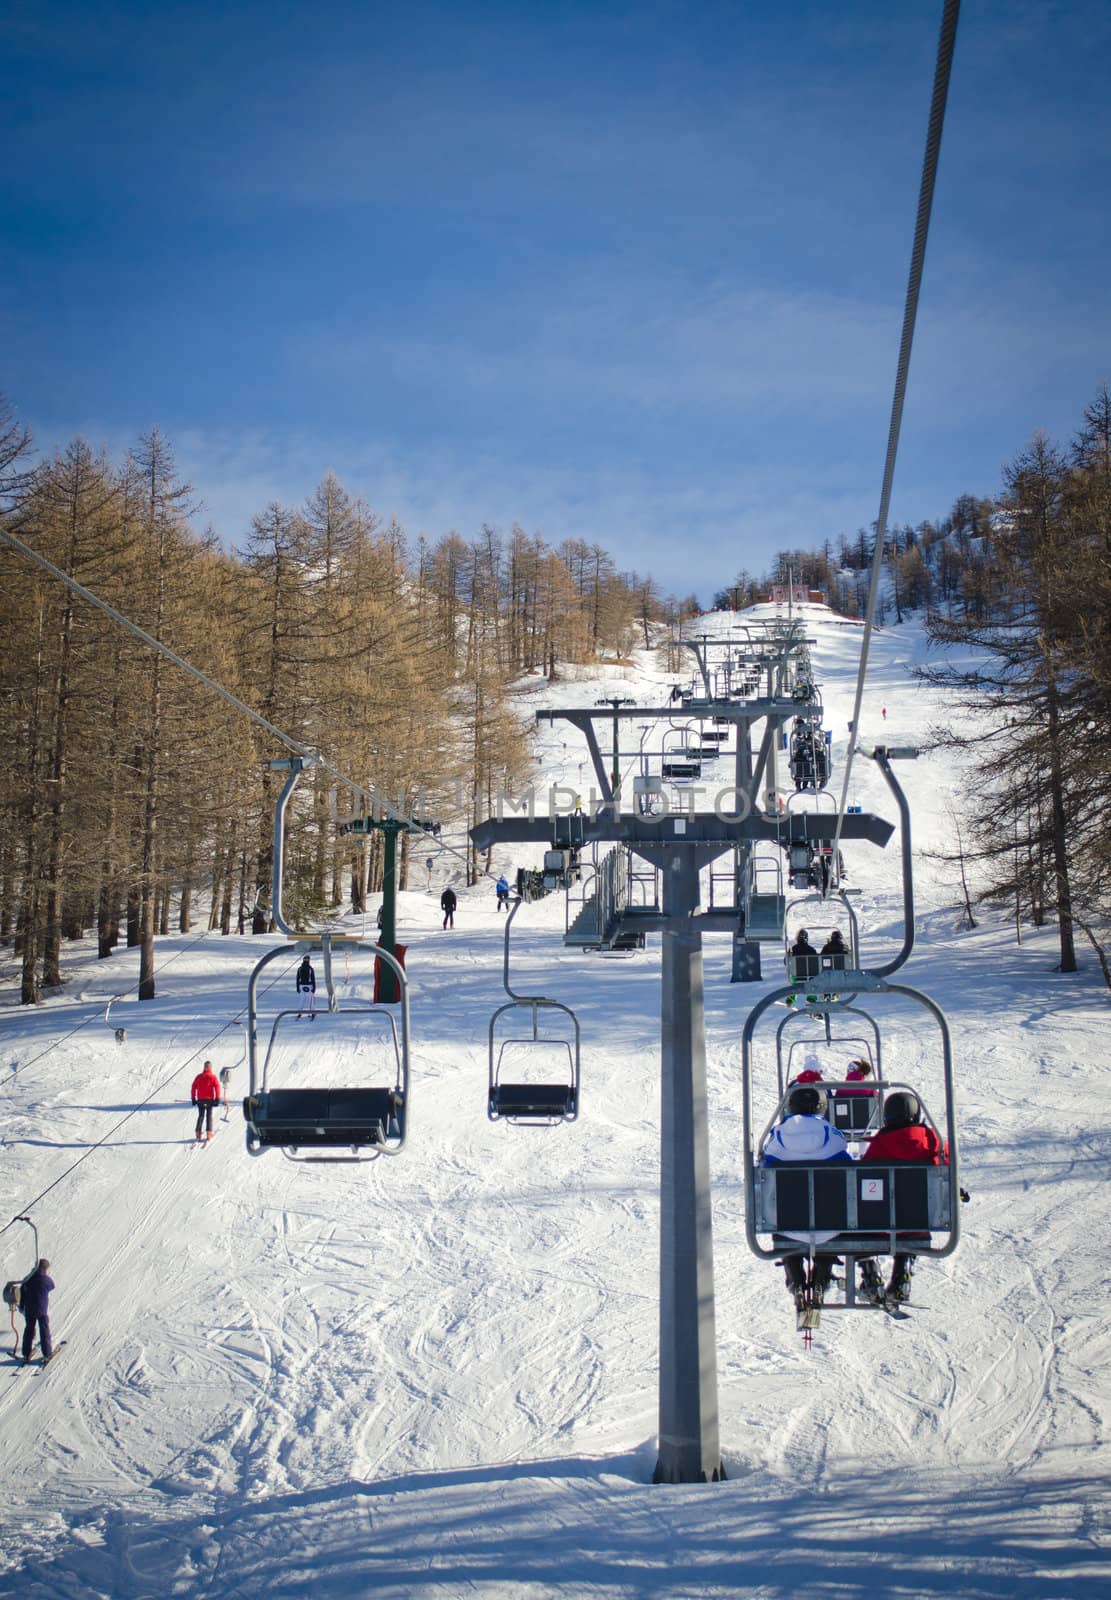 Chairlift (aerial lift) and skilift in sunny day by artofphoto